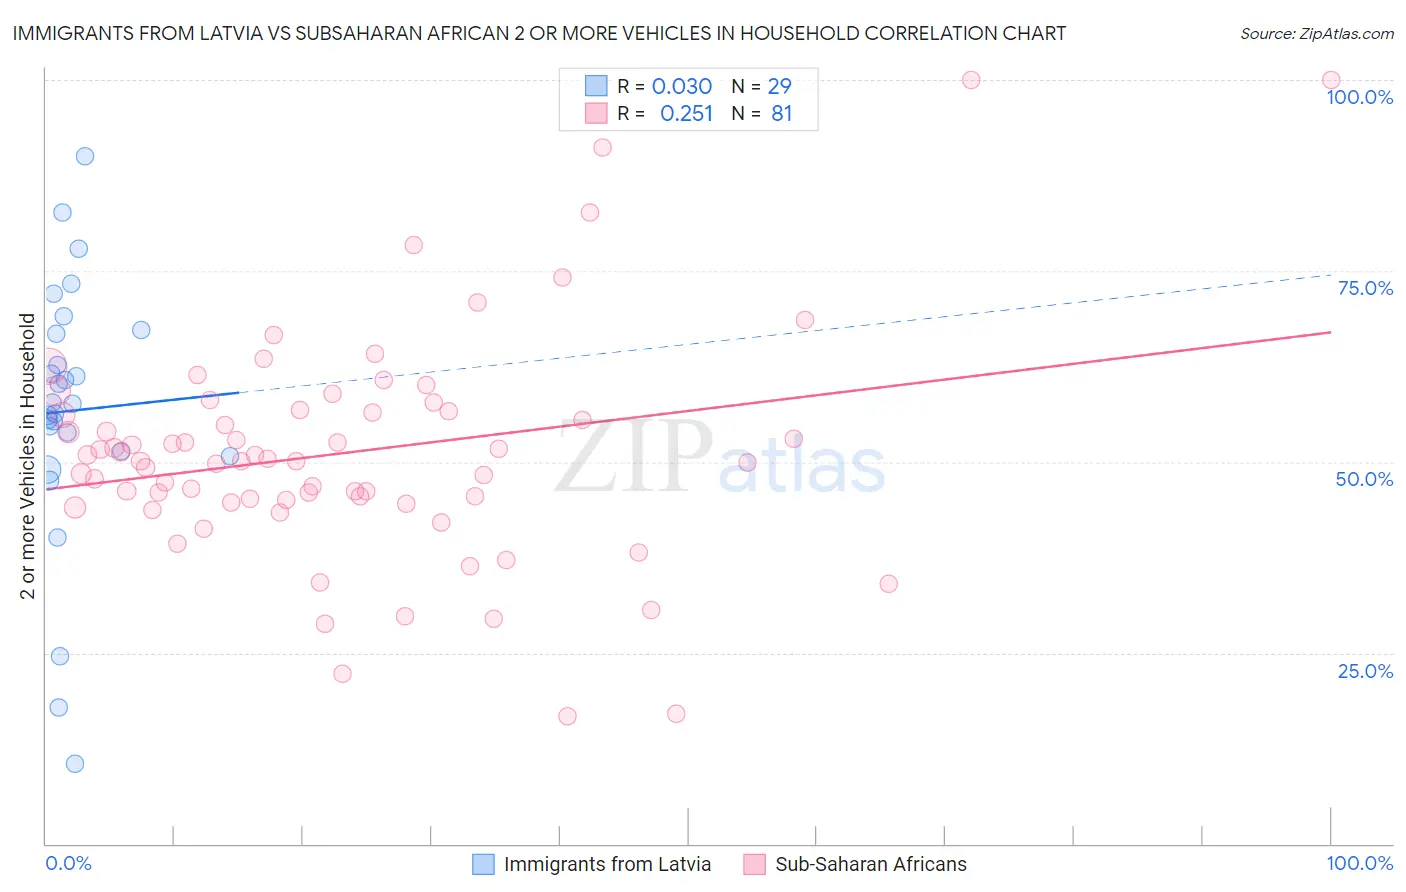 Immigrants from Latvia vs Subsaharan African 2 or more Vehicles in Household